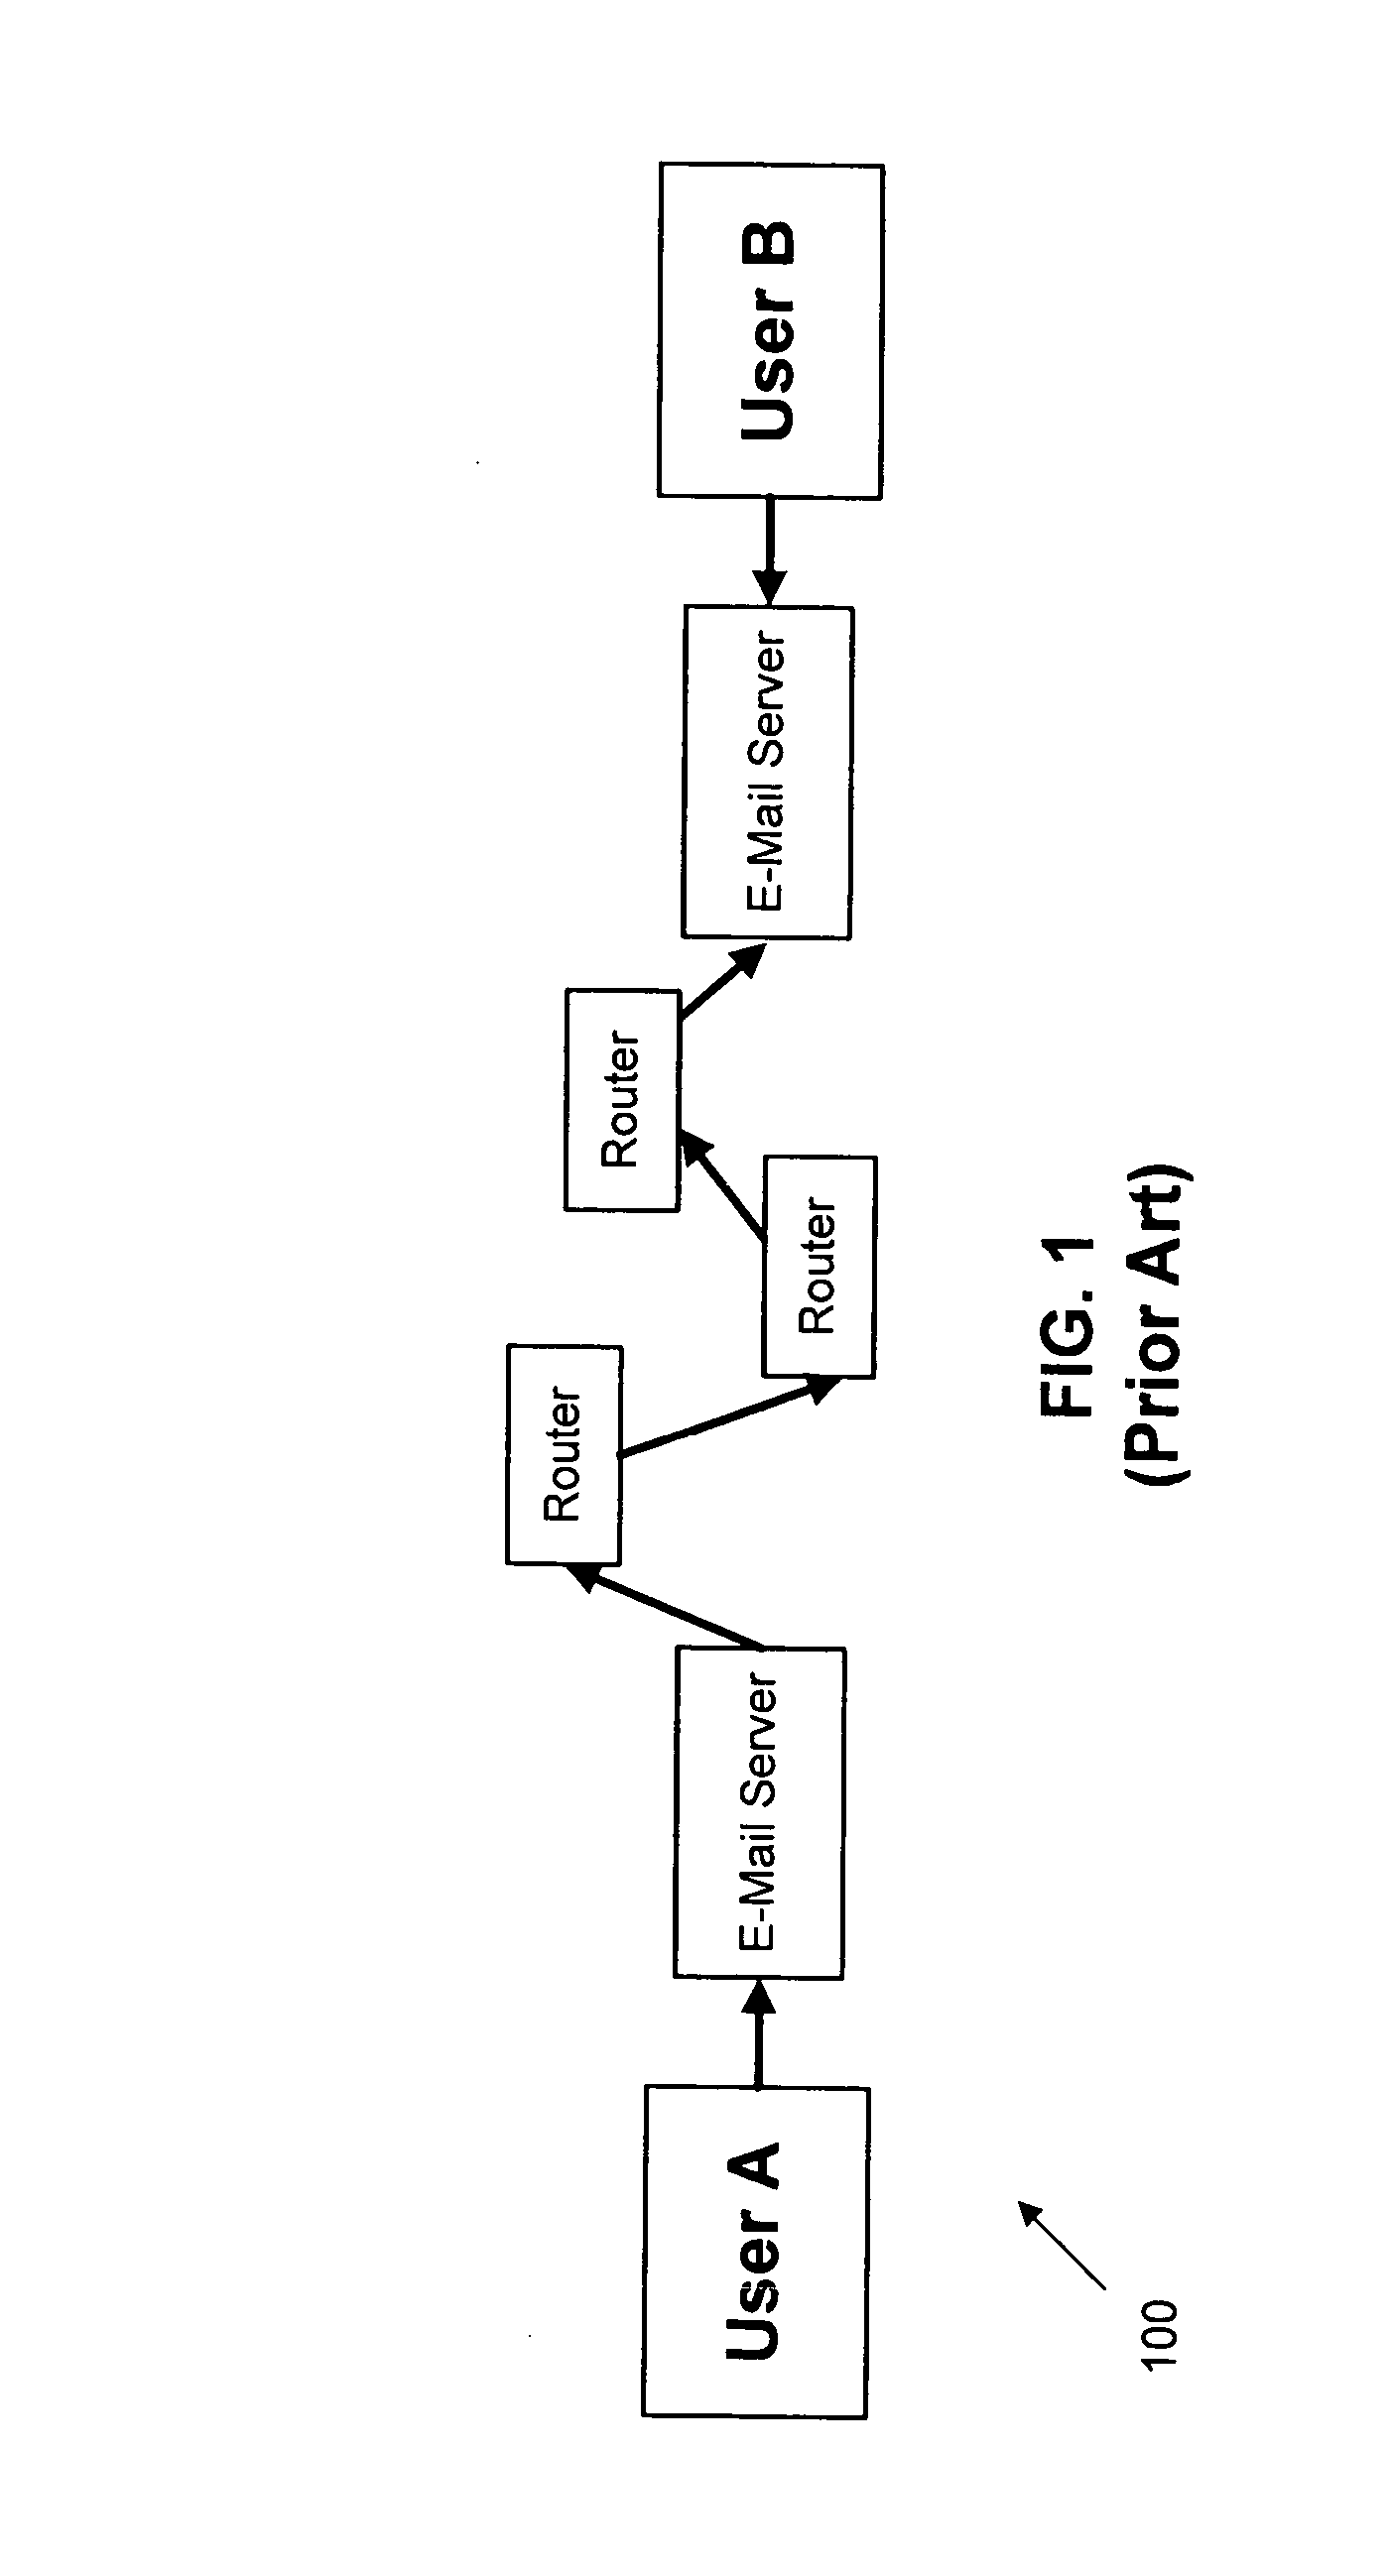 Method and apparatus for secure messaging